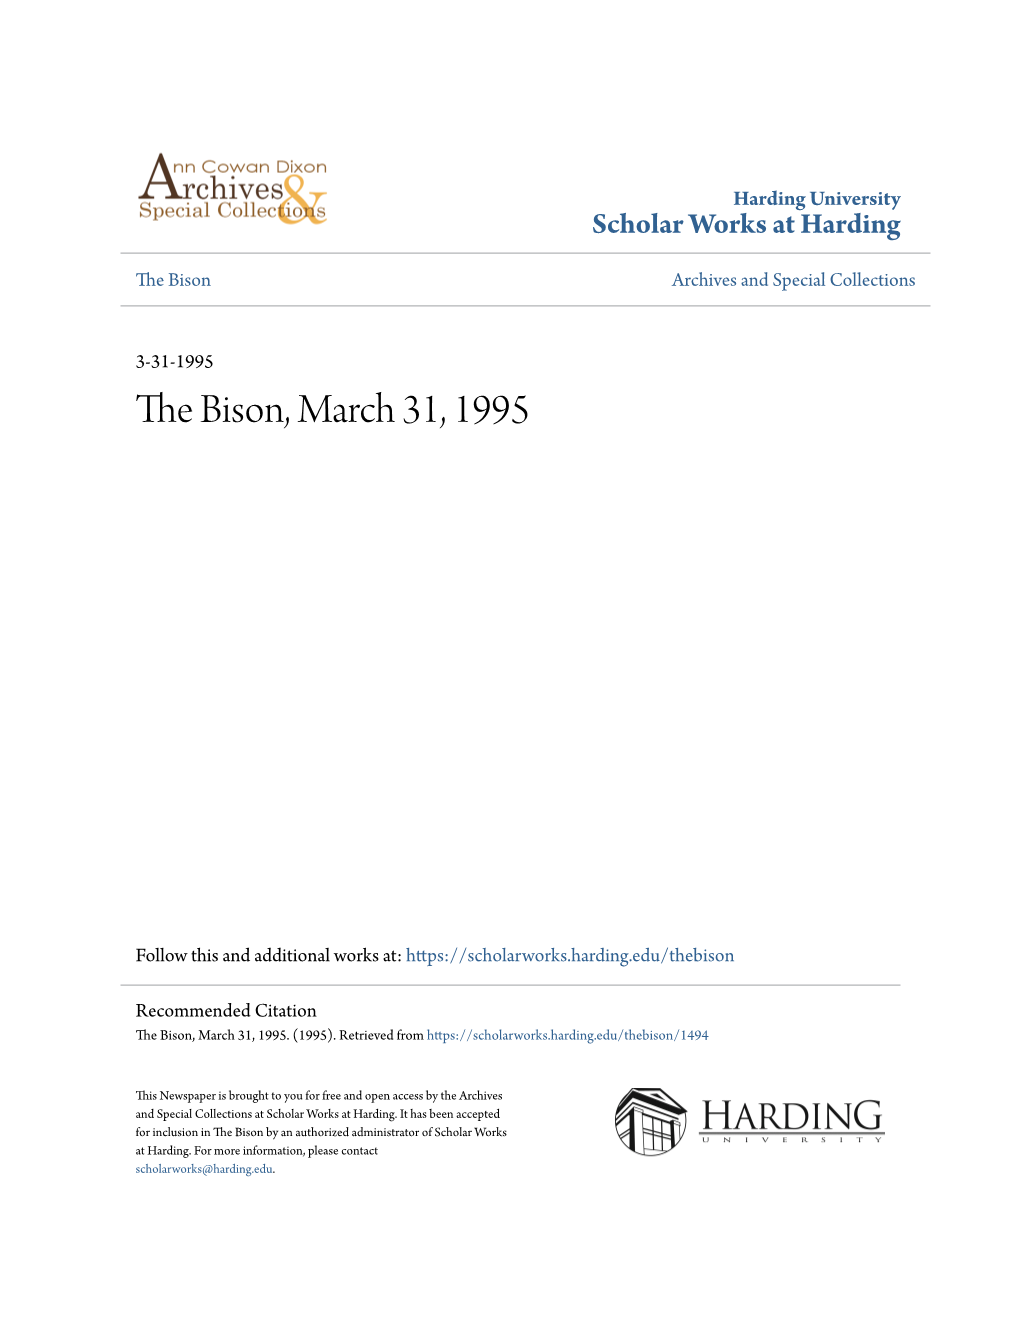 The Bison, March 31, 1995